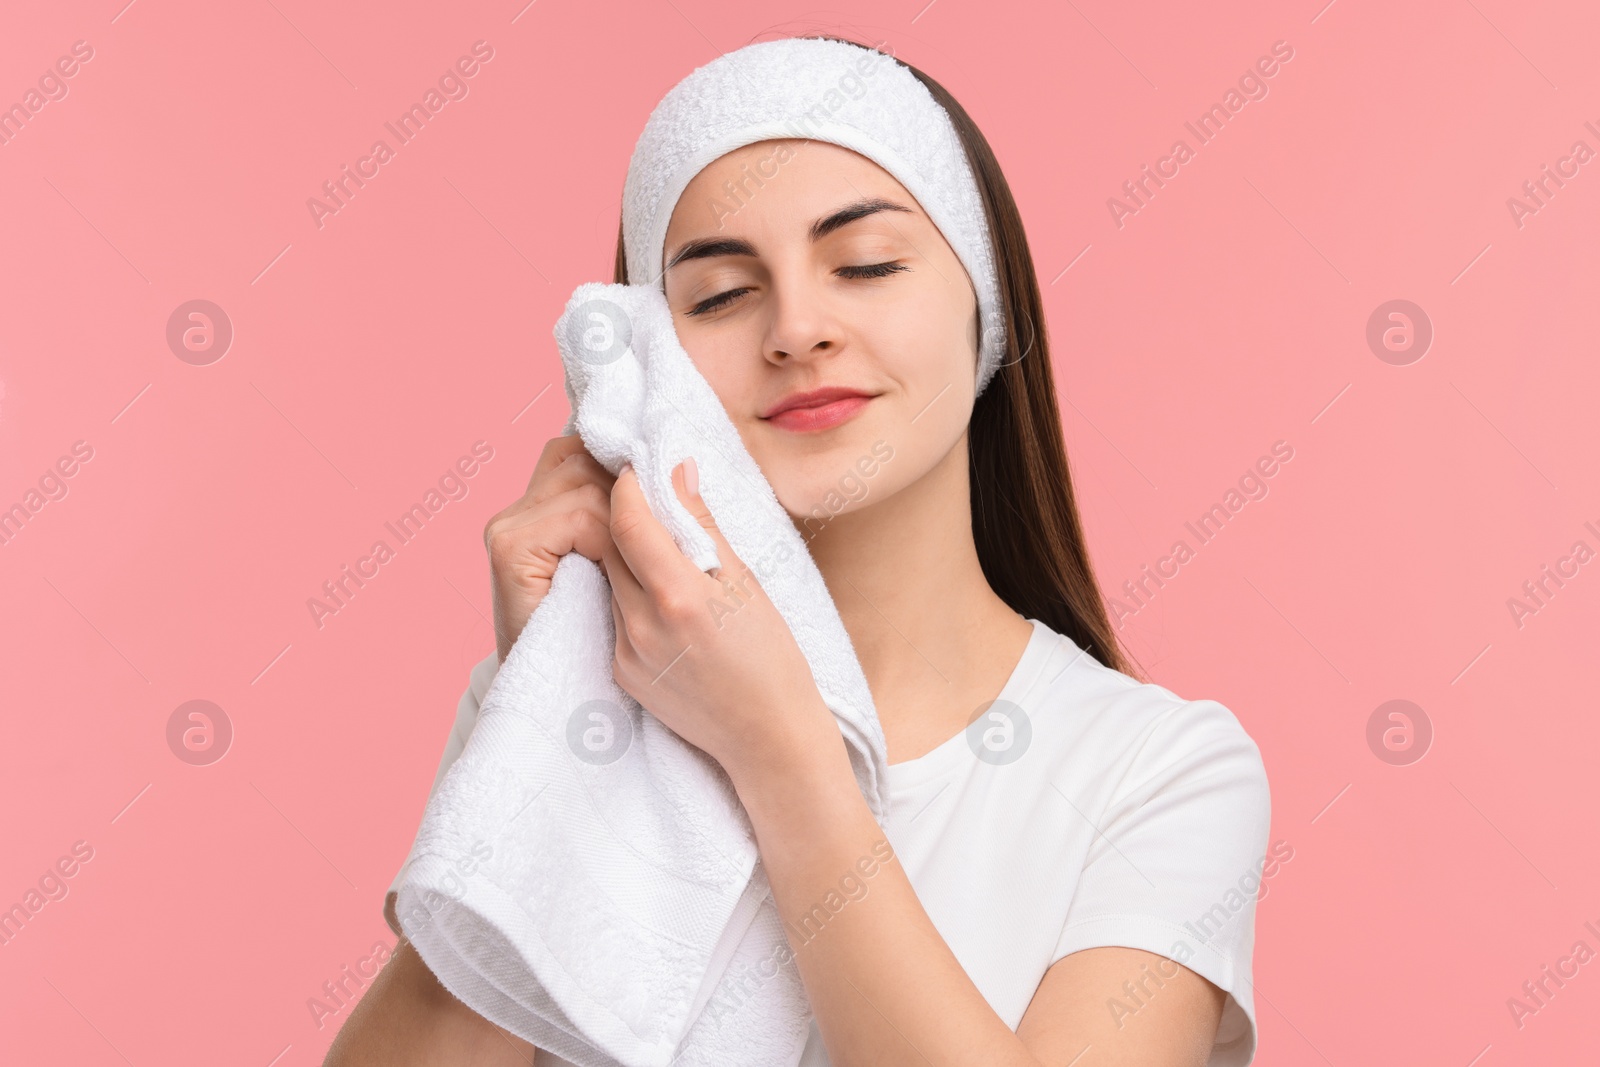 Photo of Washing face. Young woman with headband and towel on pink background